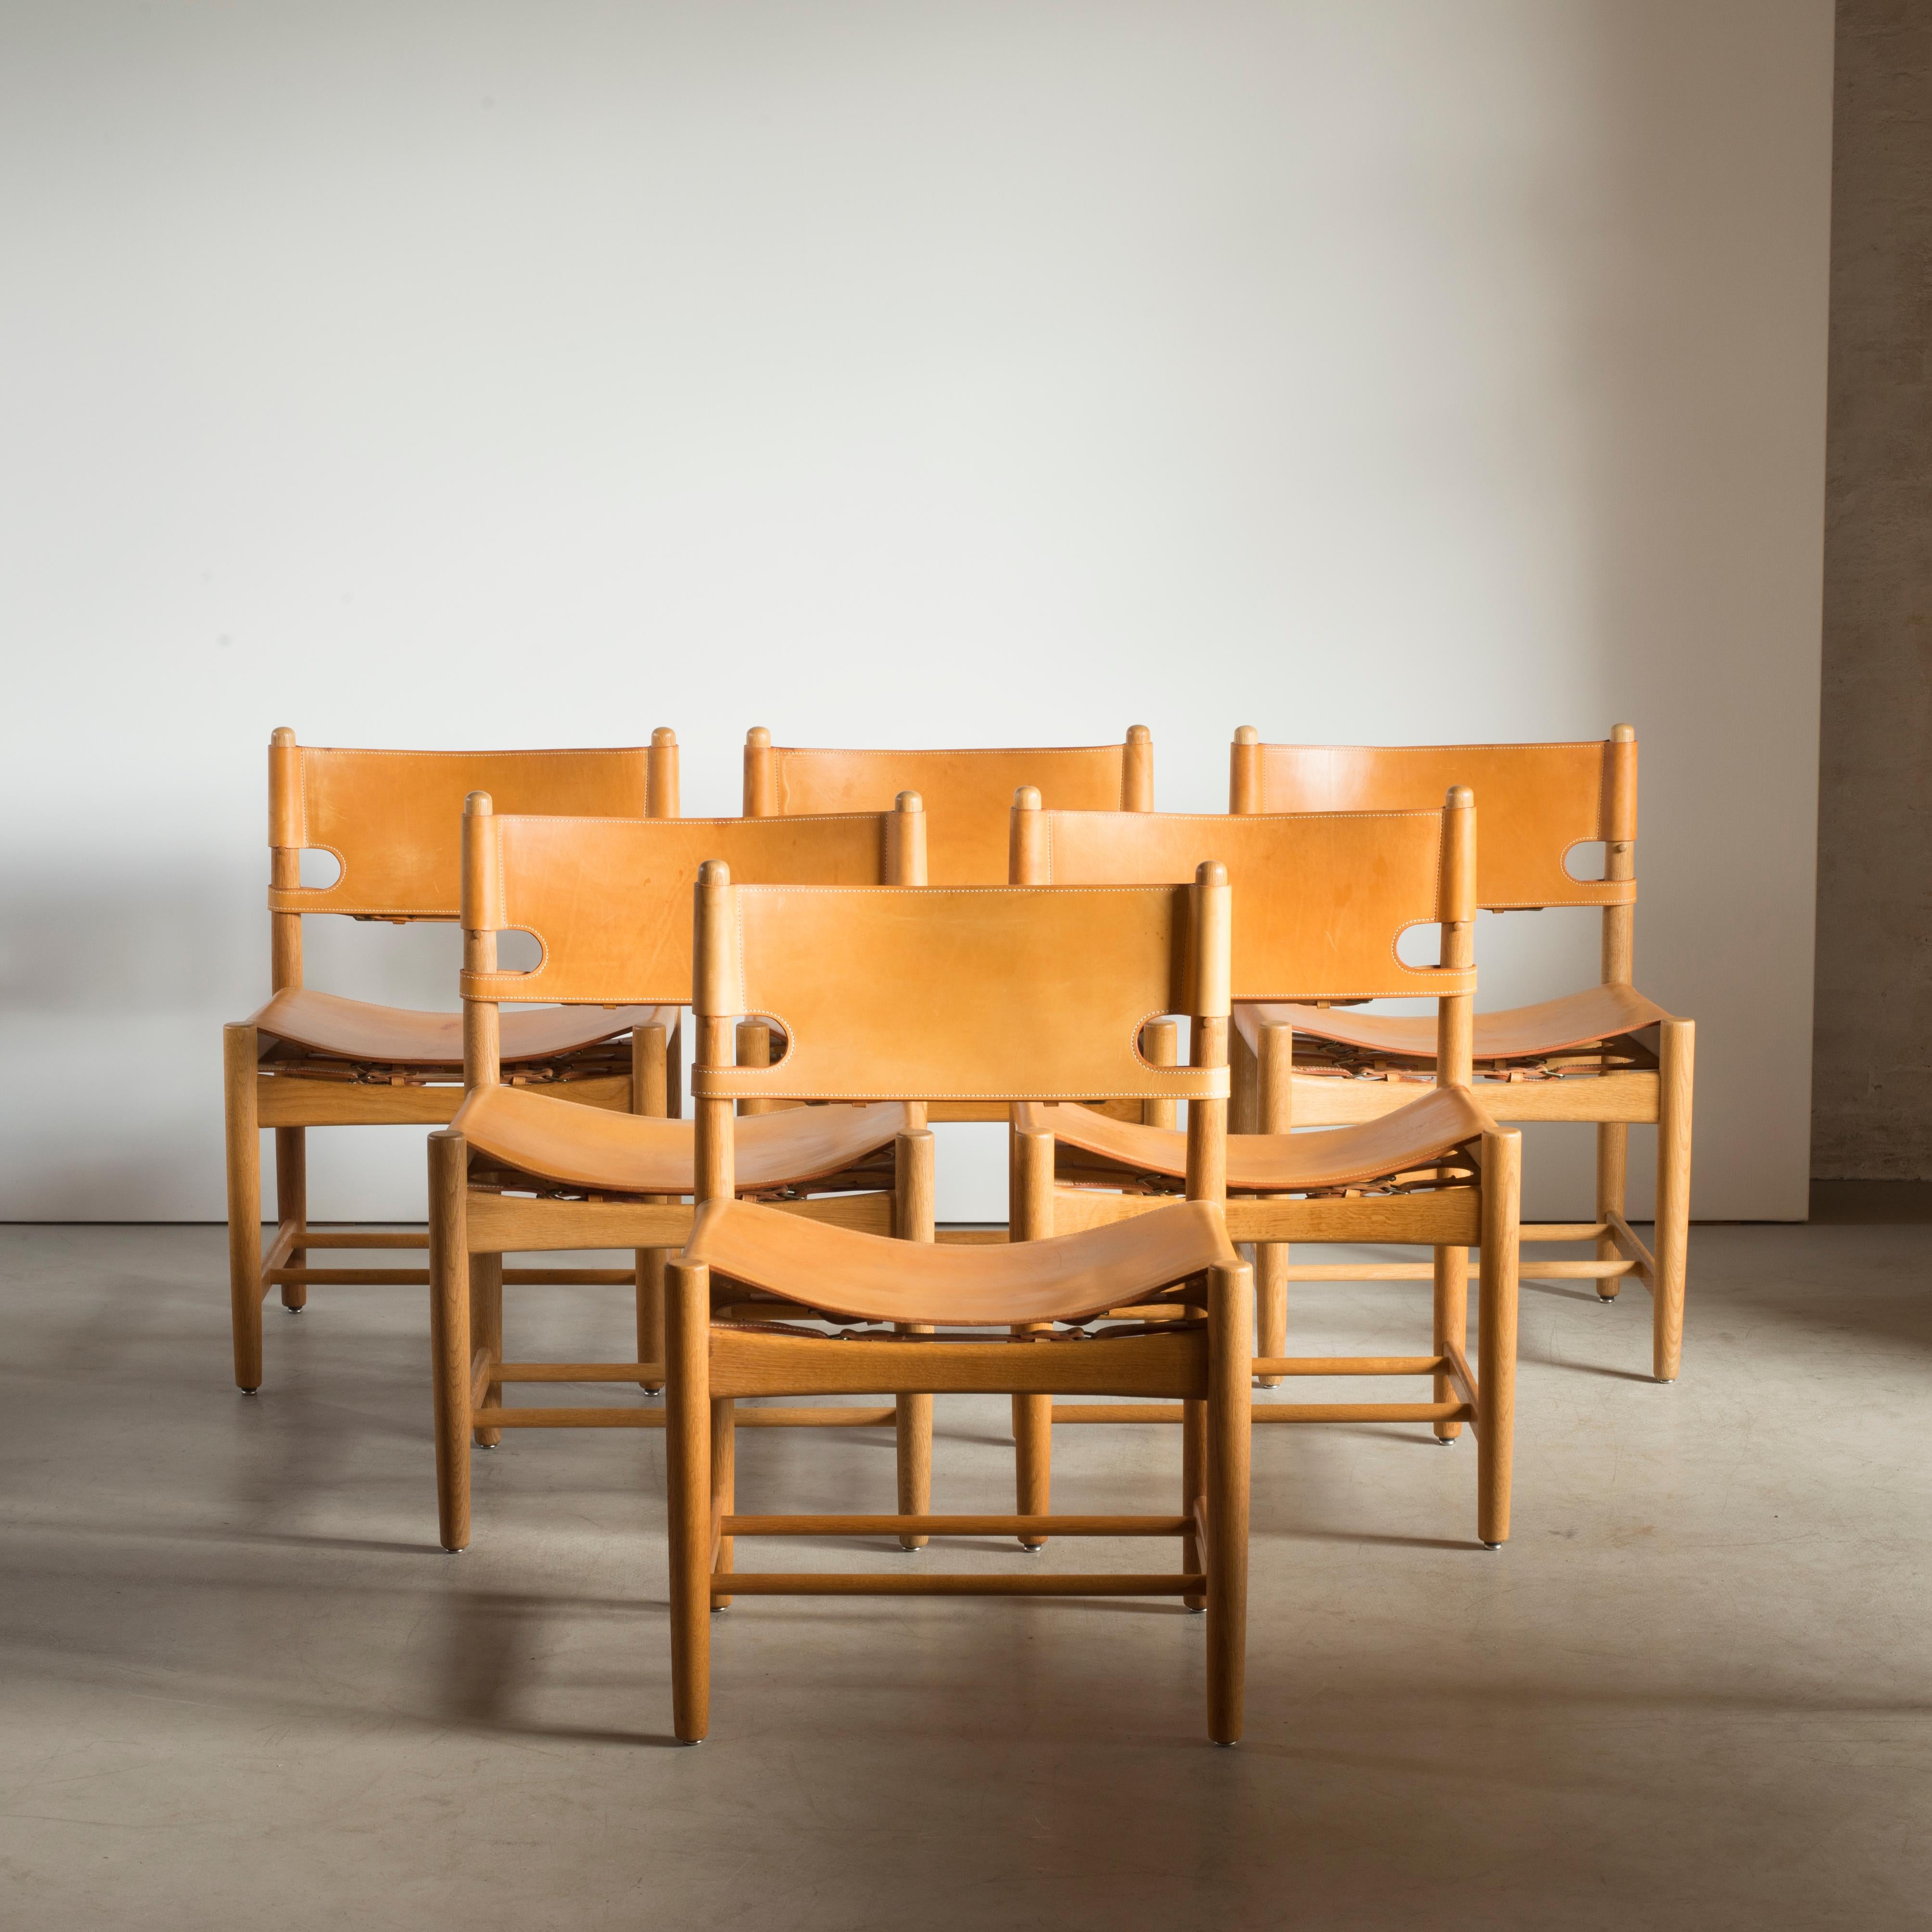 Børge Mogensen set of six dining chairs in oak and natural tanned leather. Executed by Fredericia Furniture.